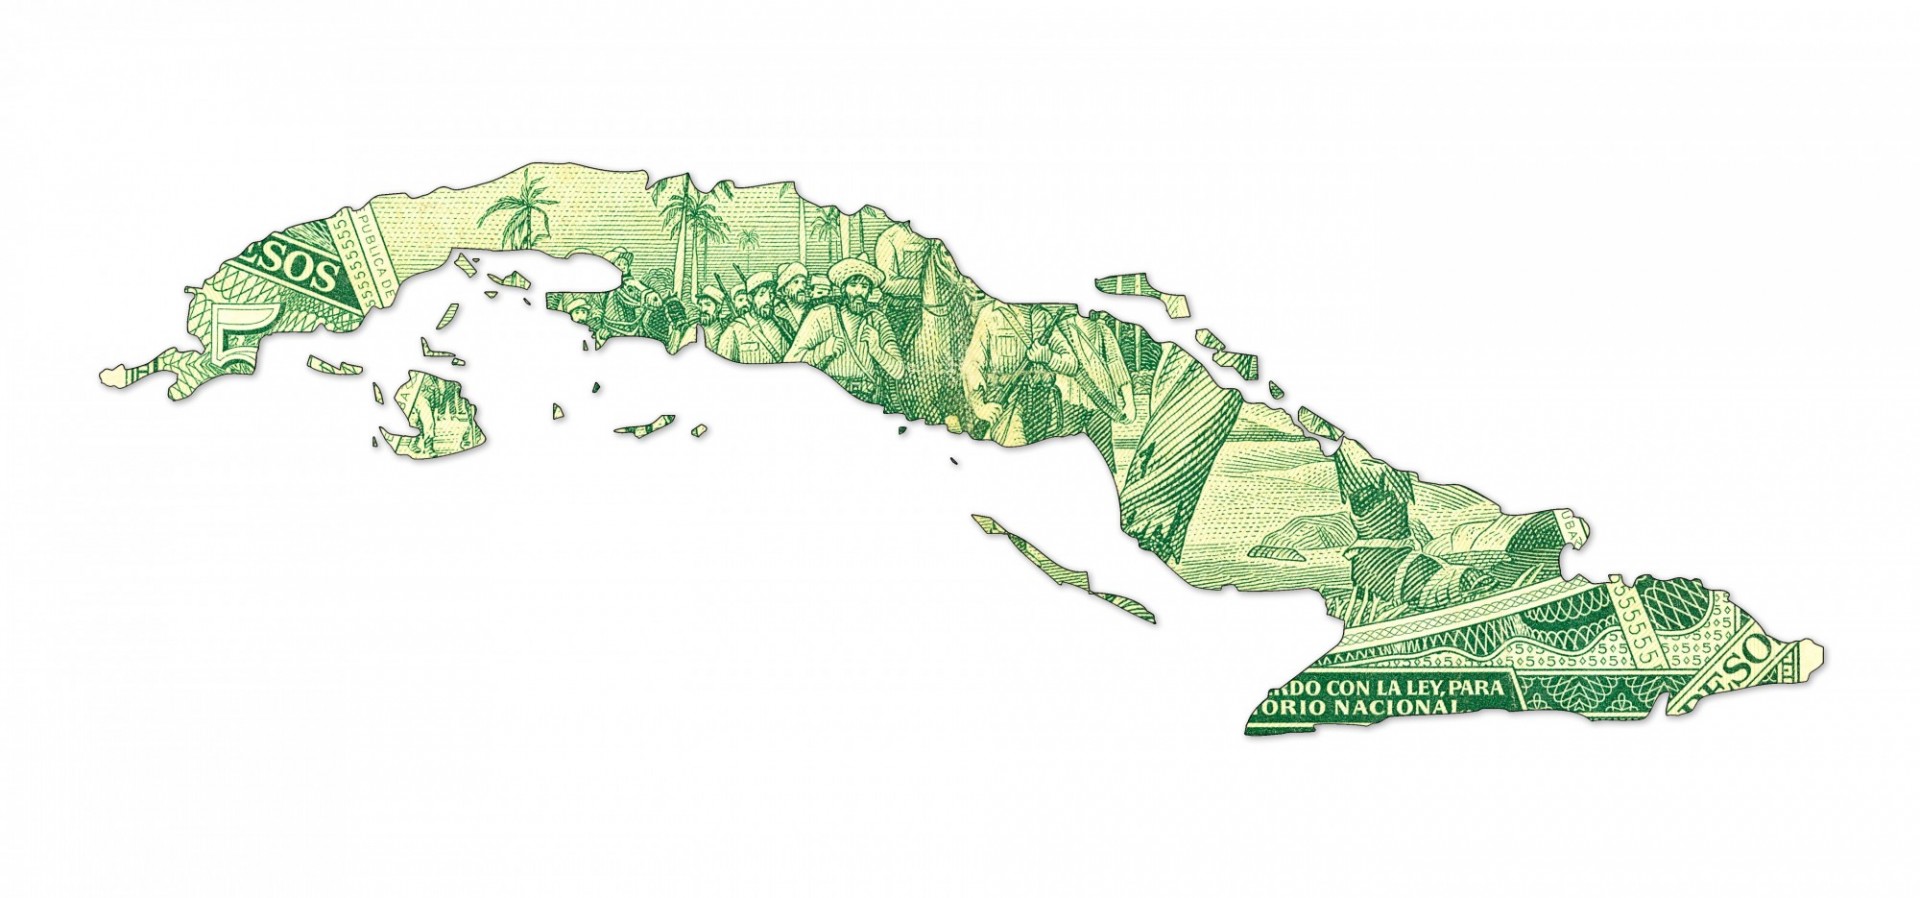 map of cuba made with banknote